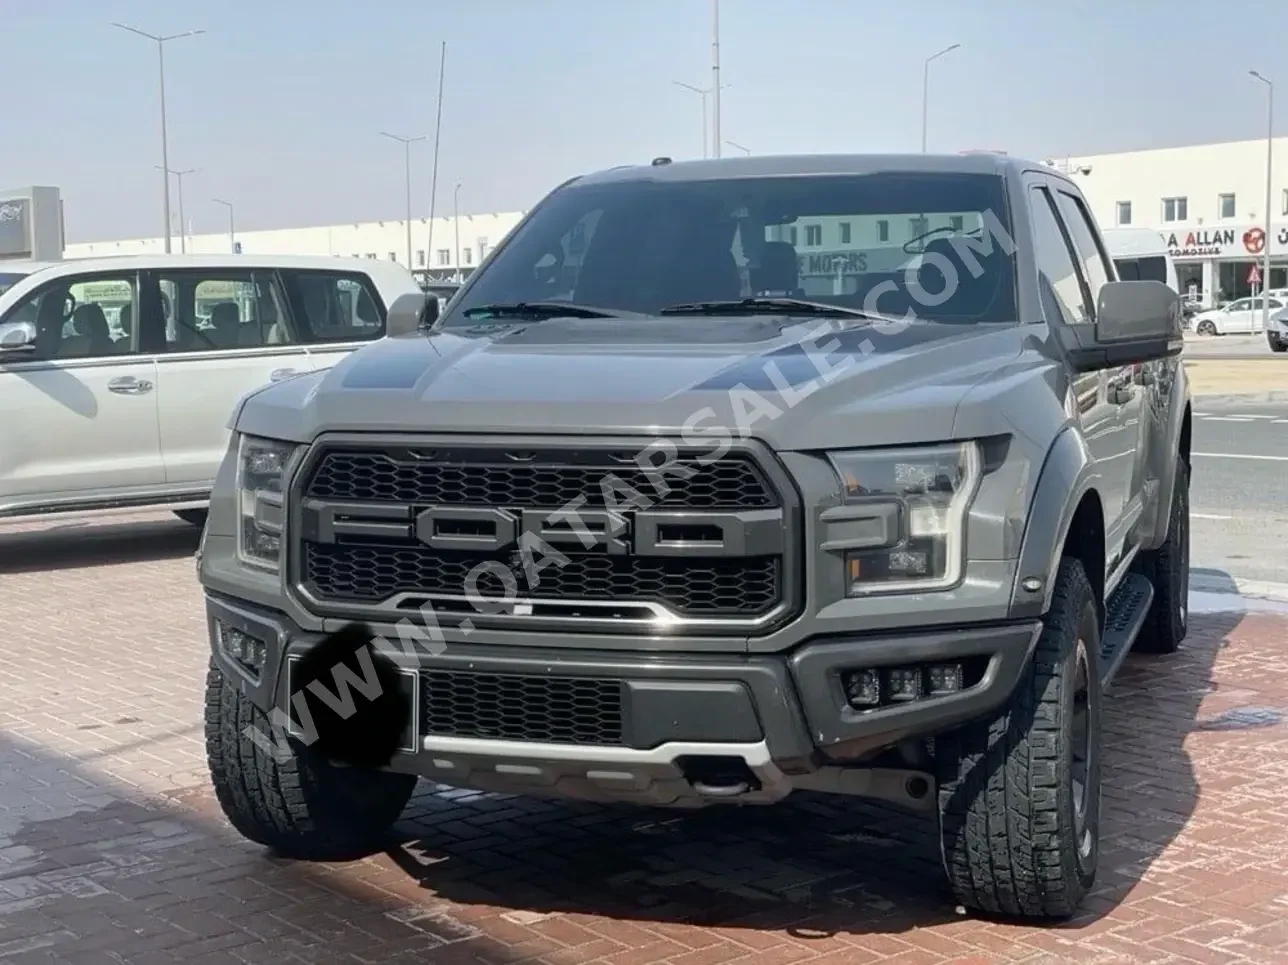 Ford  Raptor  2018  Automatic  124,000 Km  6 Cylinder  Four Wheel Drive (4WD)  Pick Up  Dark Gray  With Warranty